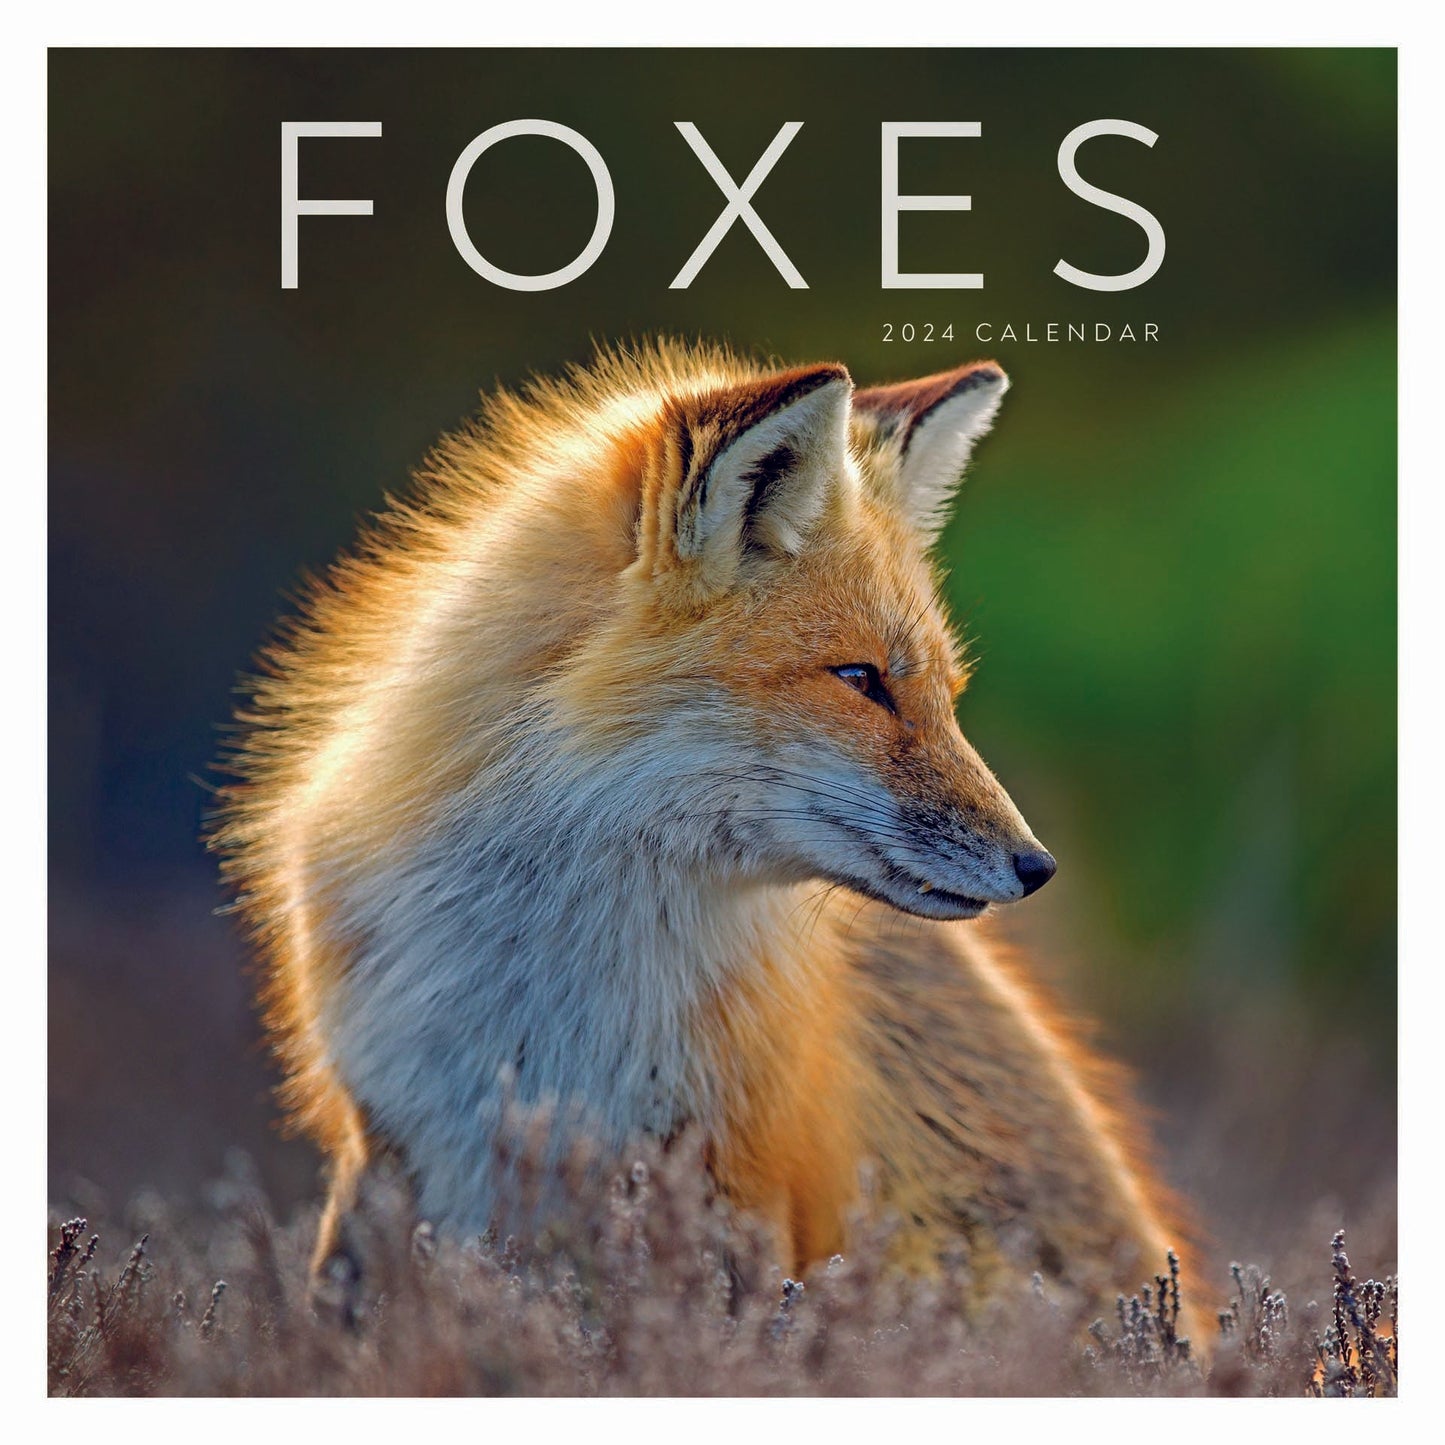 Foxes Square Wall Calendar 2024